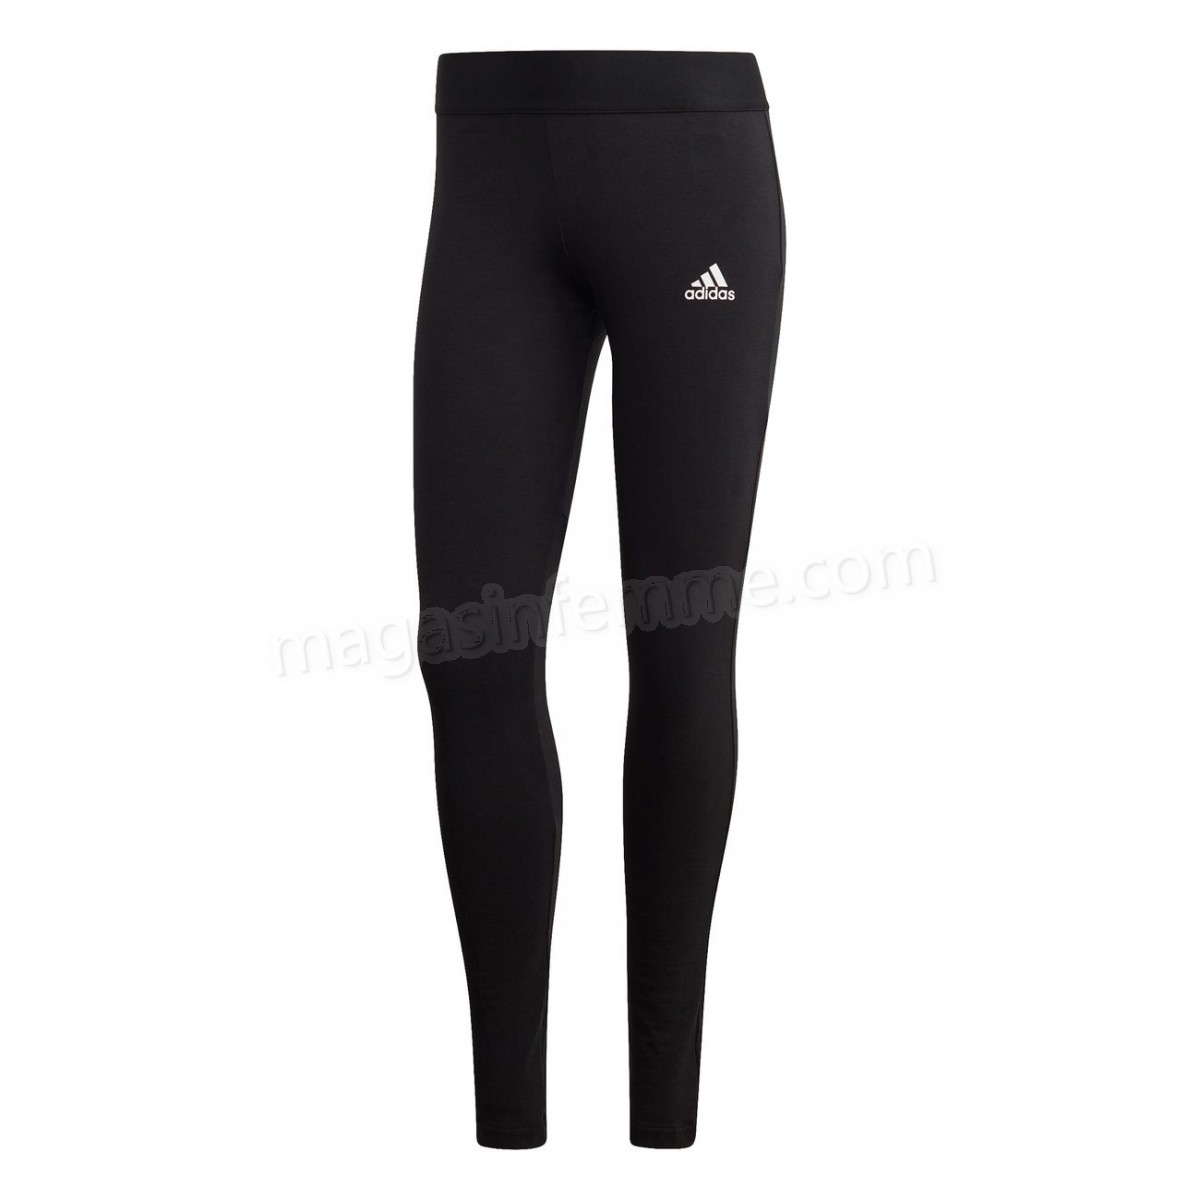 Adidas-Fitness femme ADIDAS Collant femme adidas Must Haves 3-Stripes en solde - -7